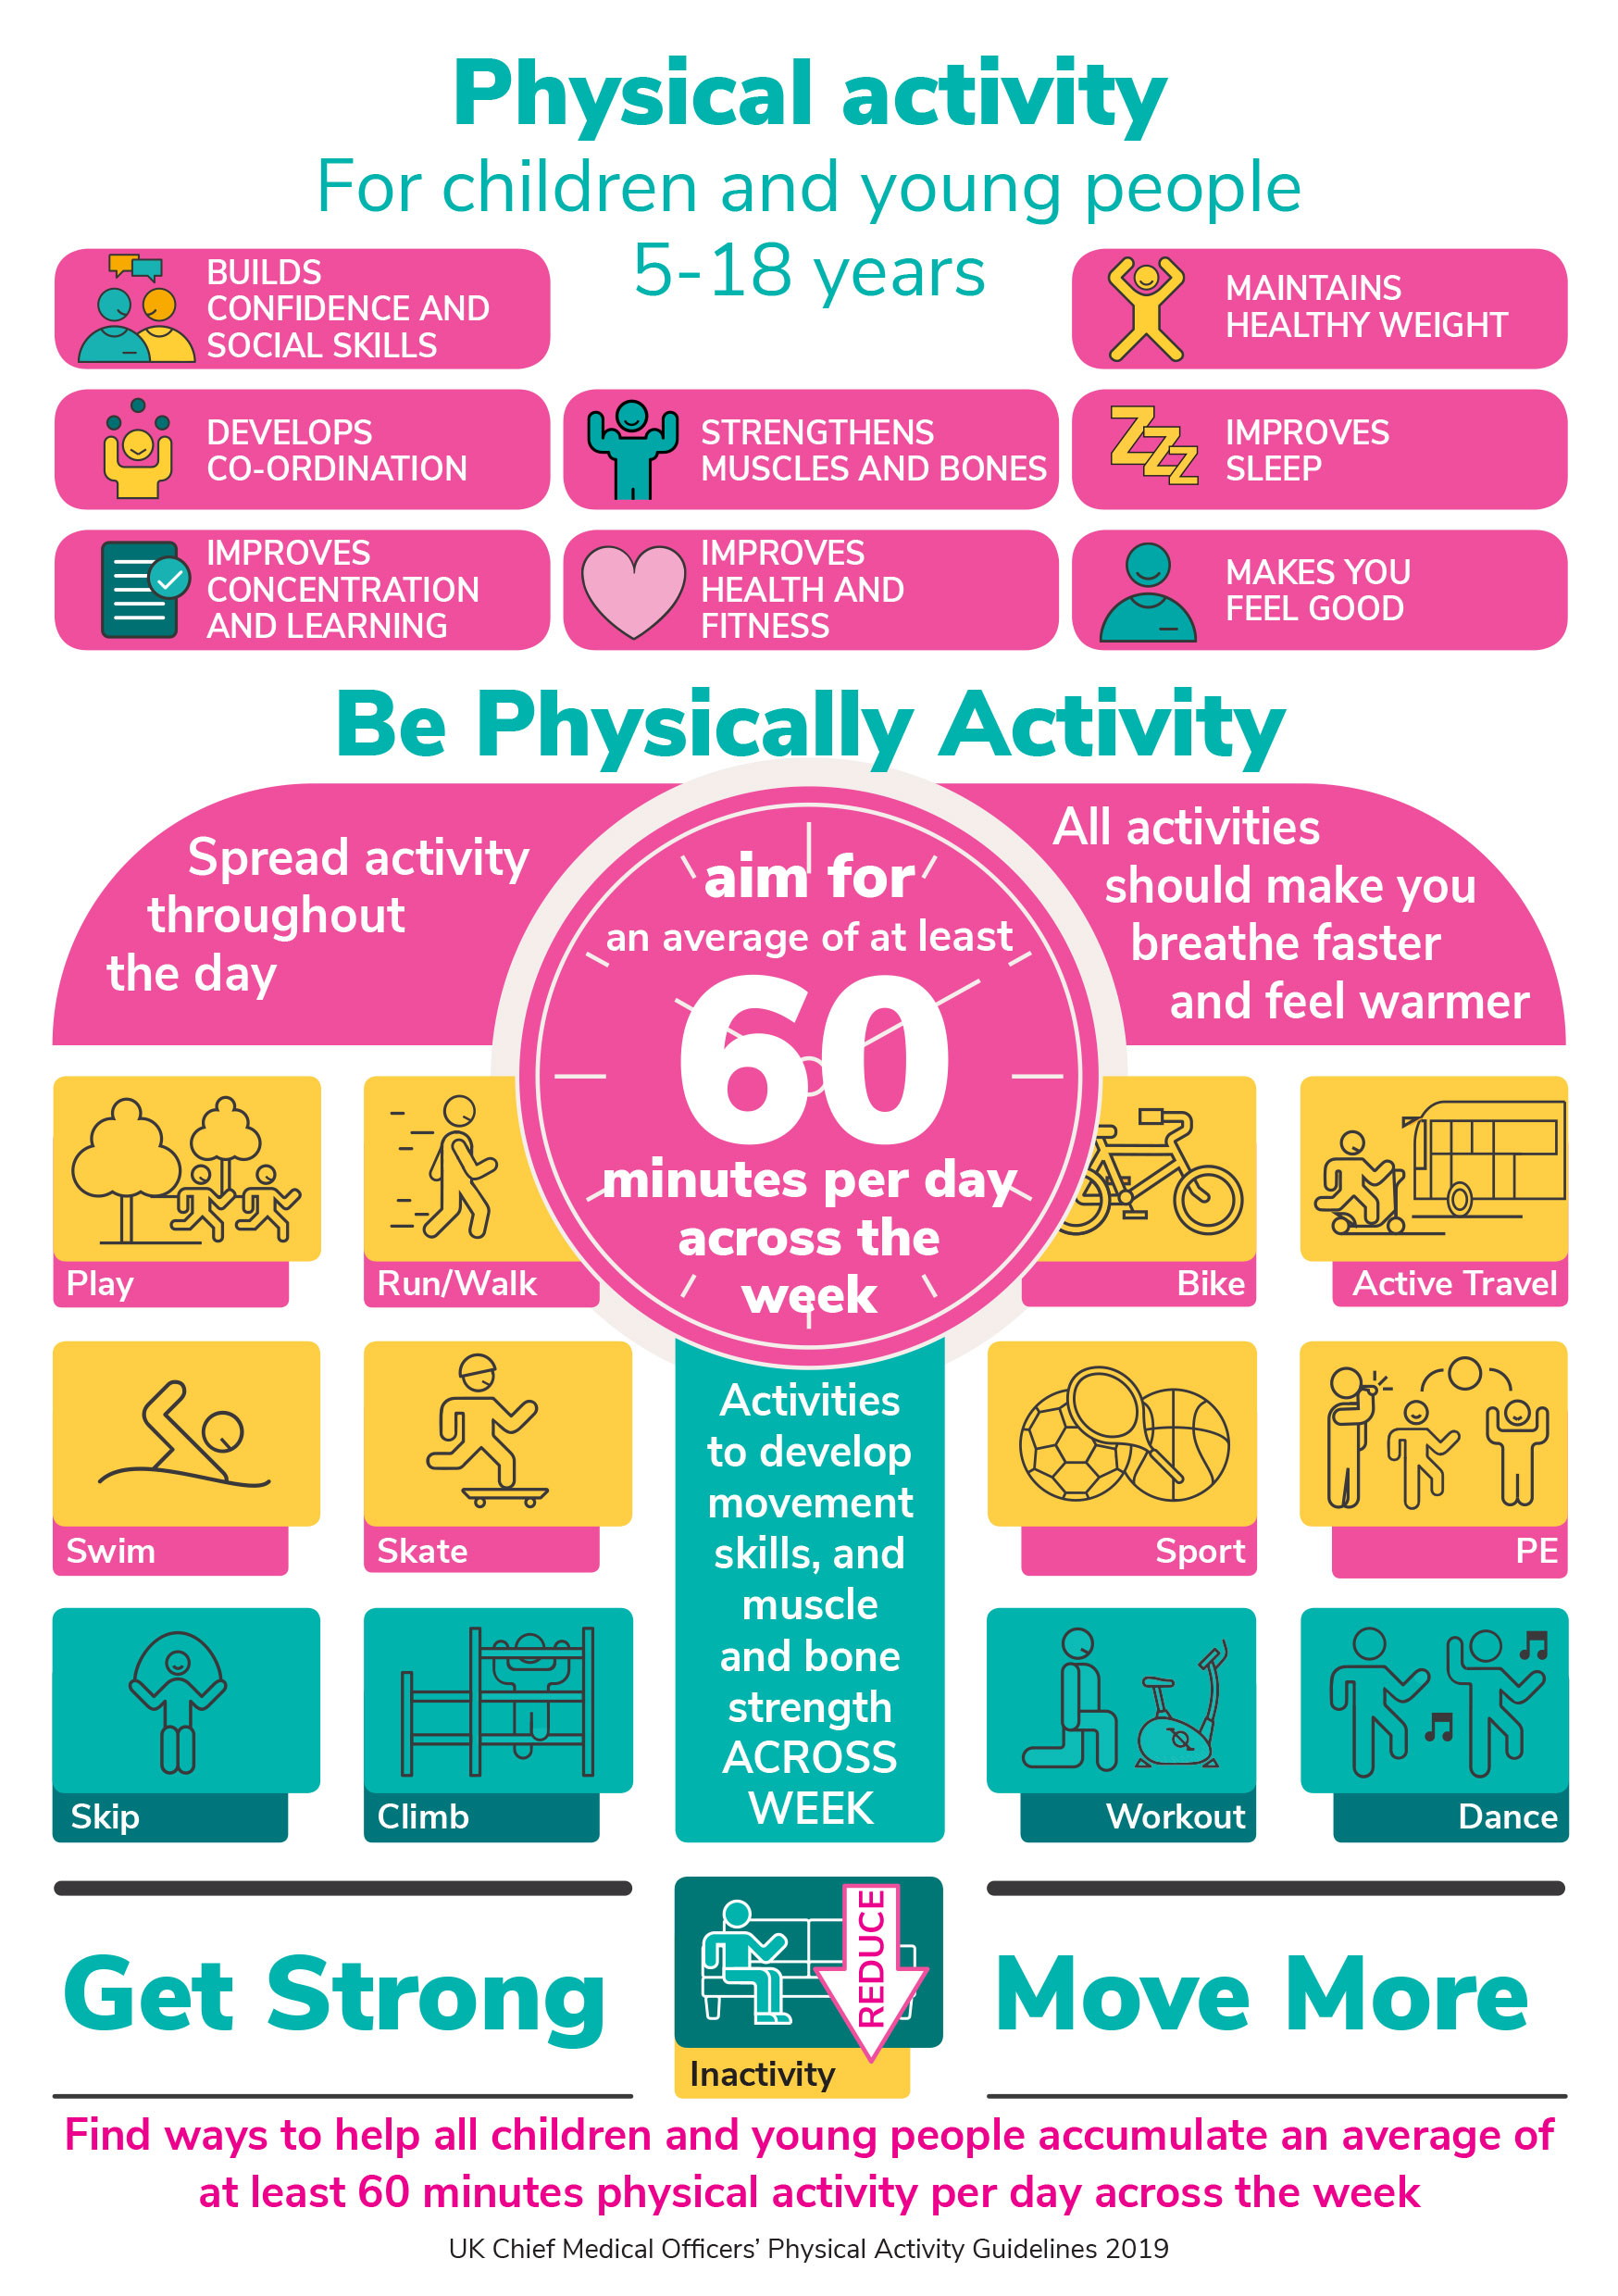 Physical activity guidelines 5-18 years